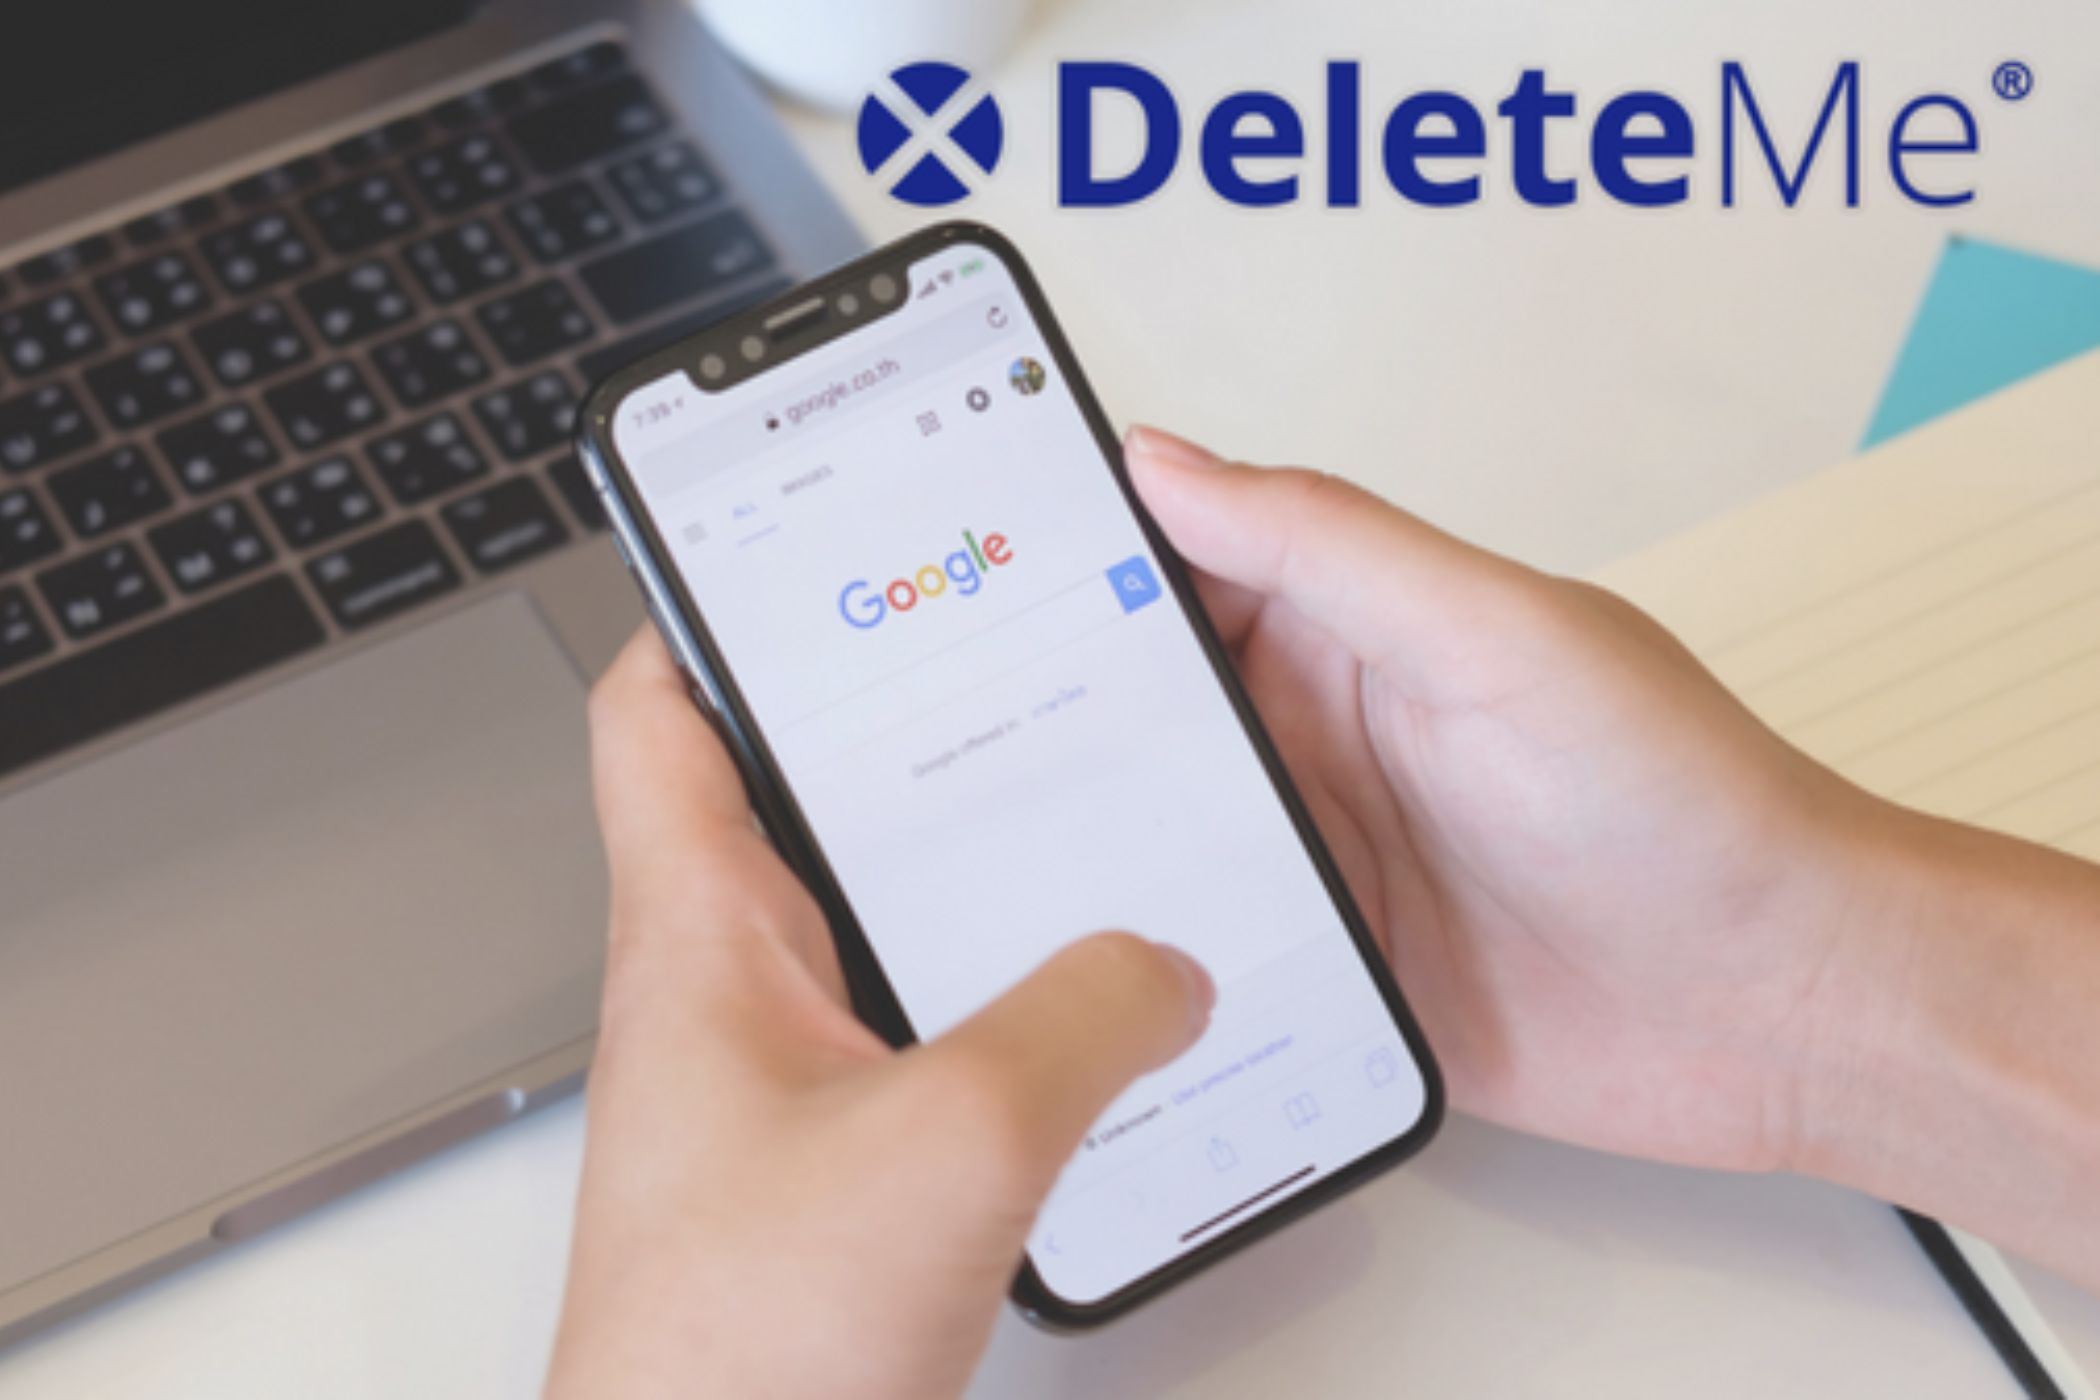 DeleteMe users browsing Google on a phone.